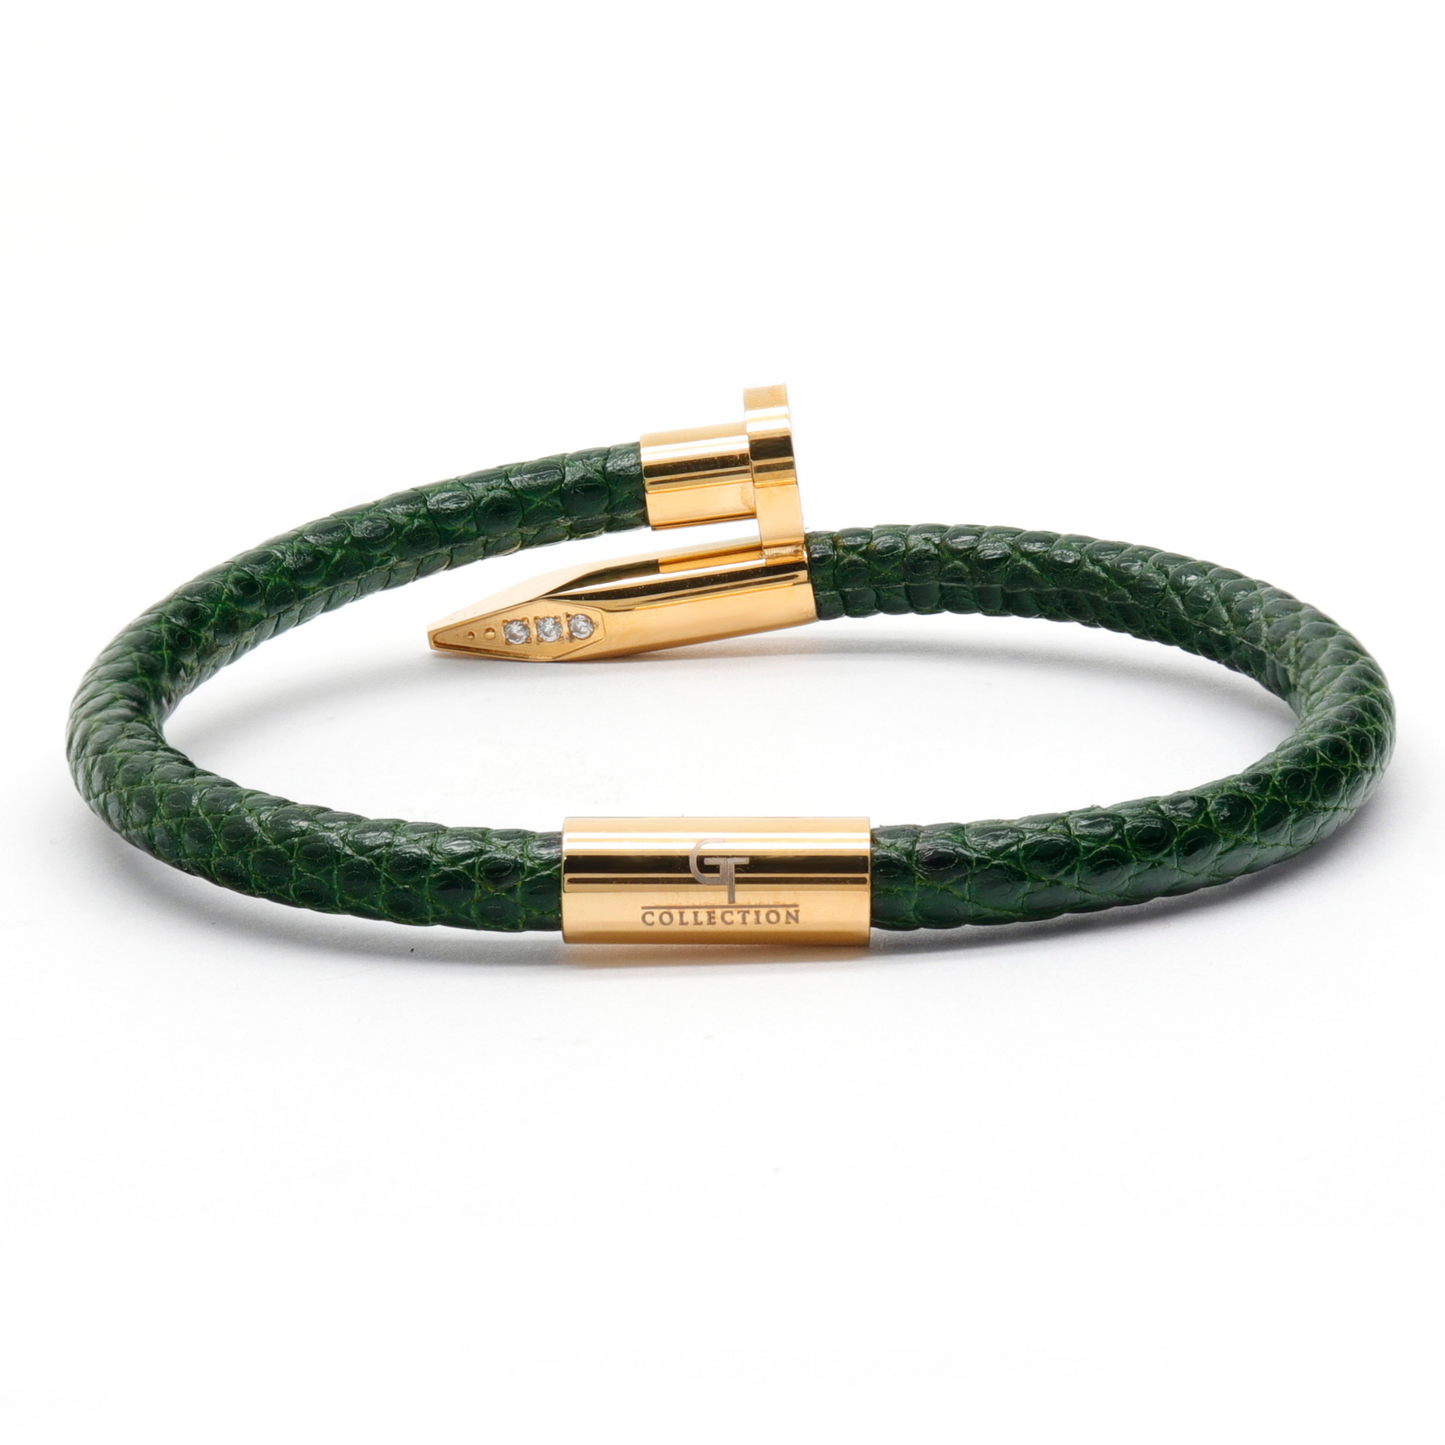 Bracelet - Green Leather with Golden Nail and Zircon Diamond